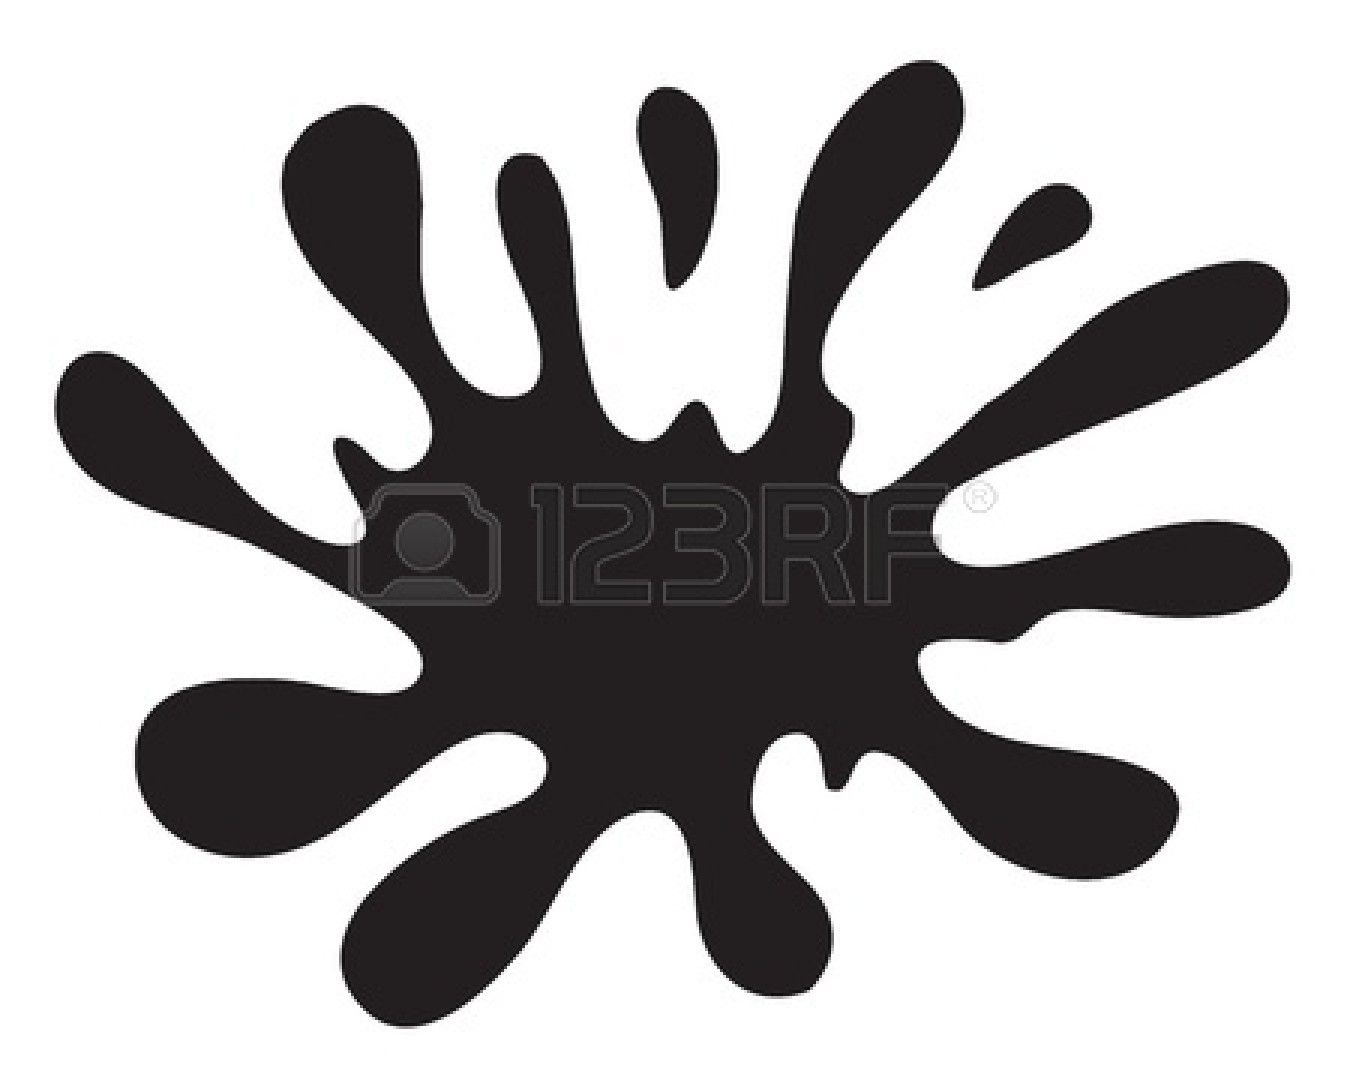 free online black and white clipart - photo #2